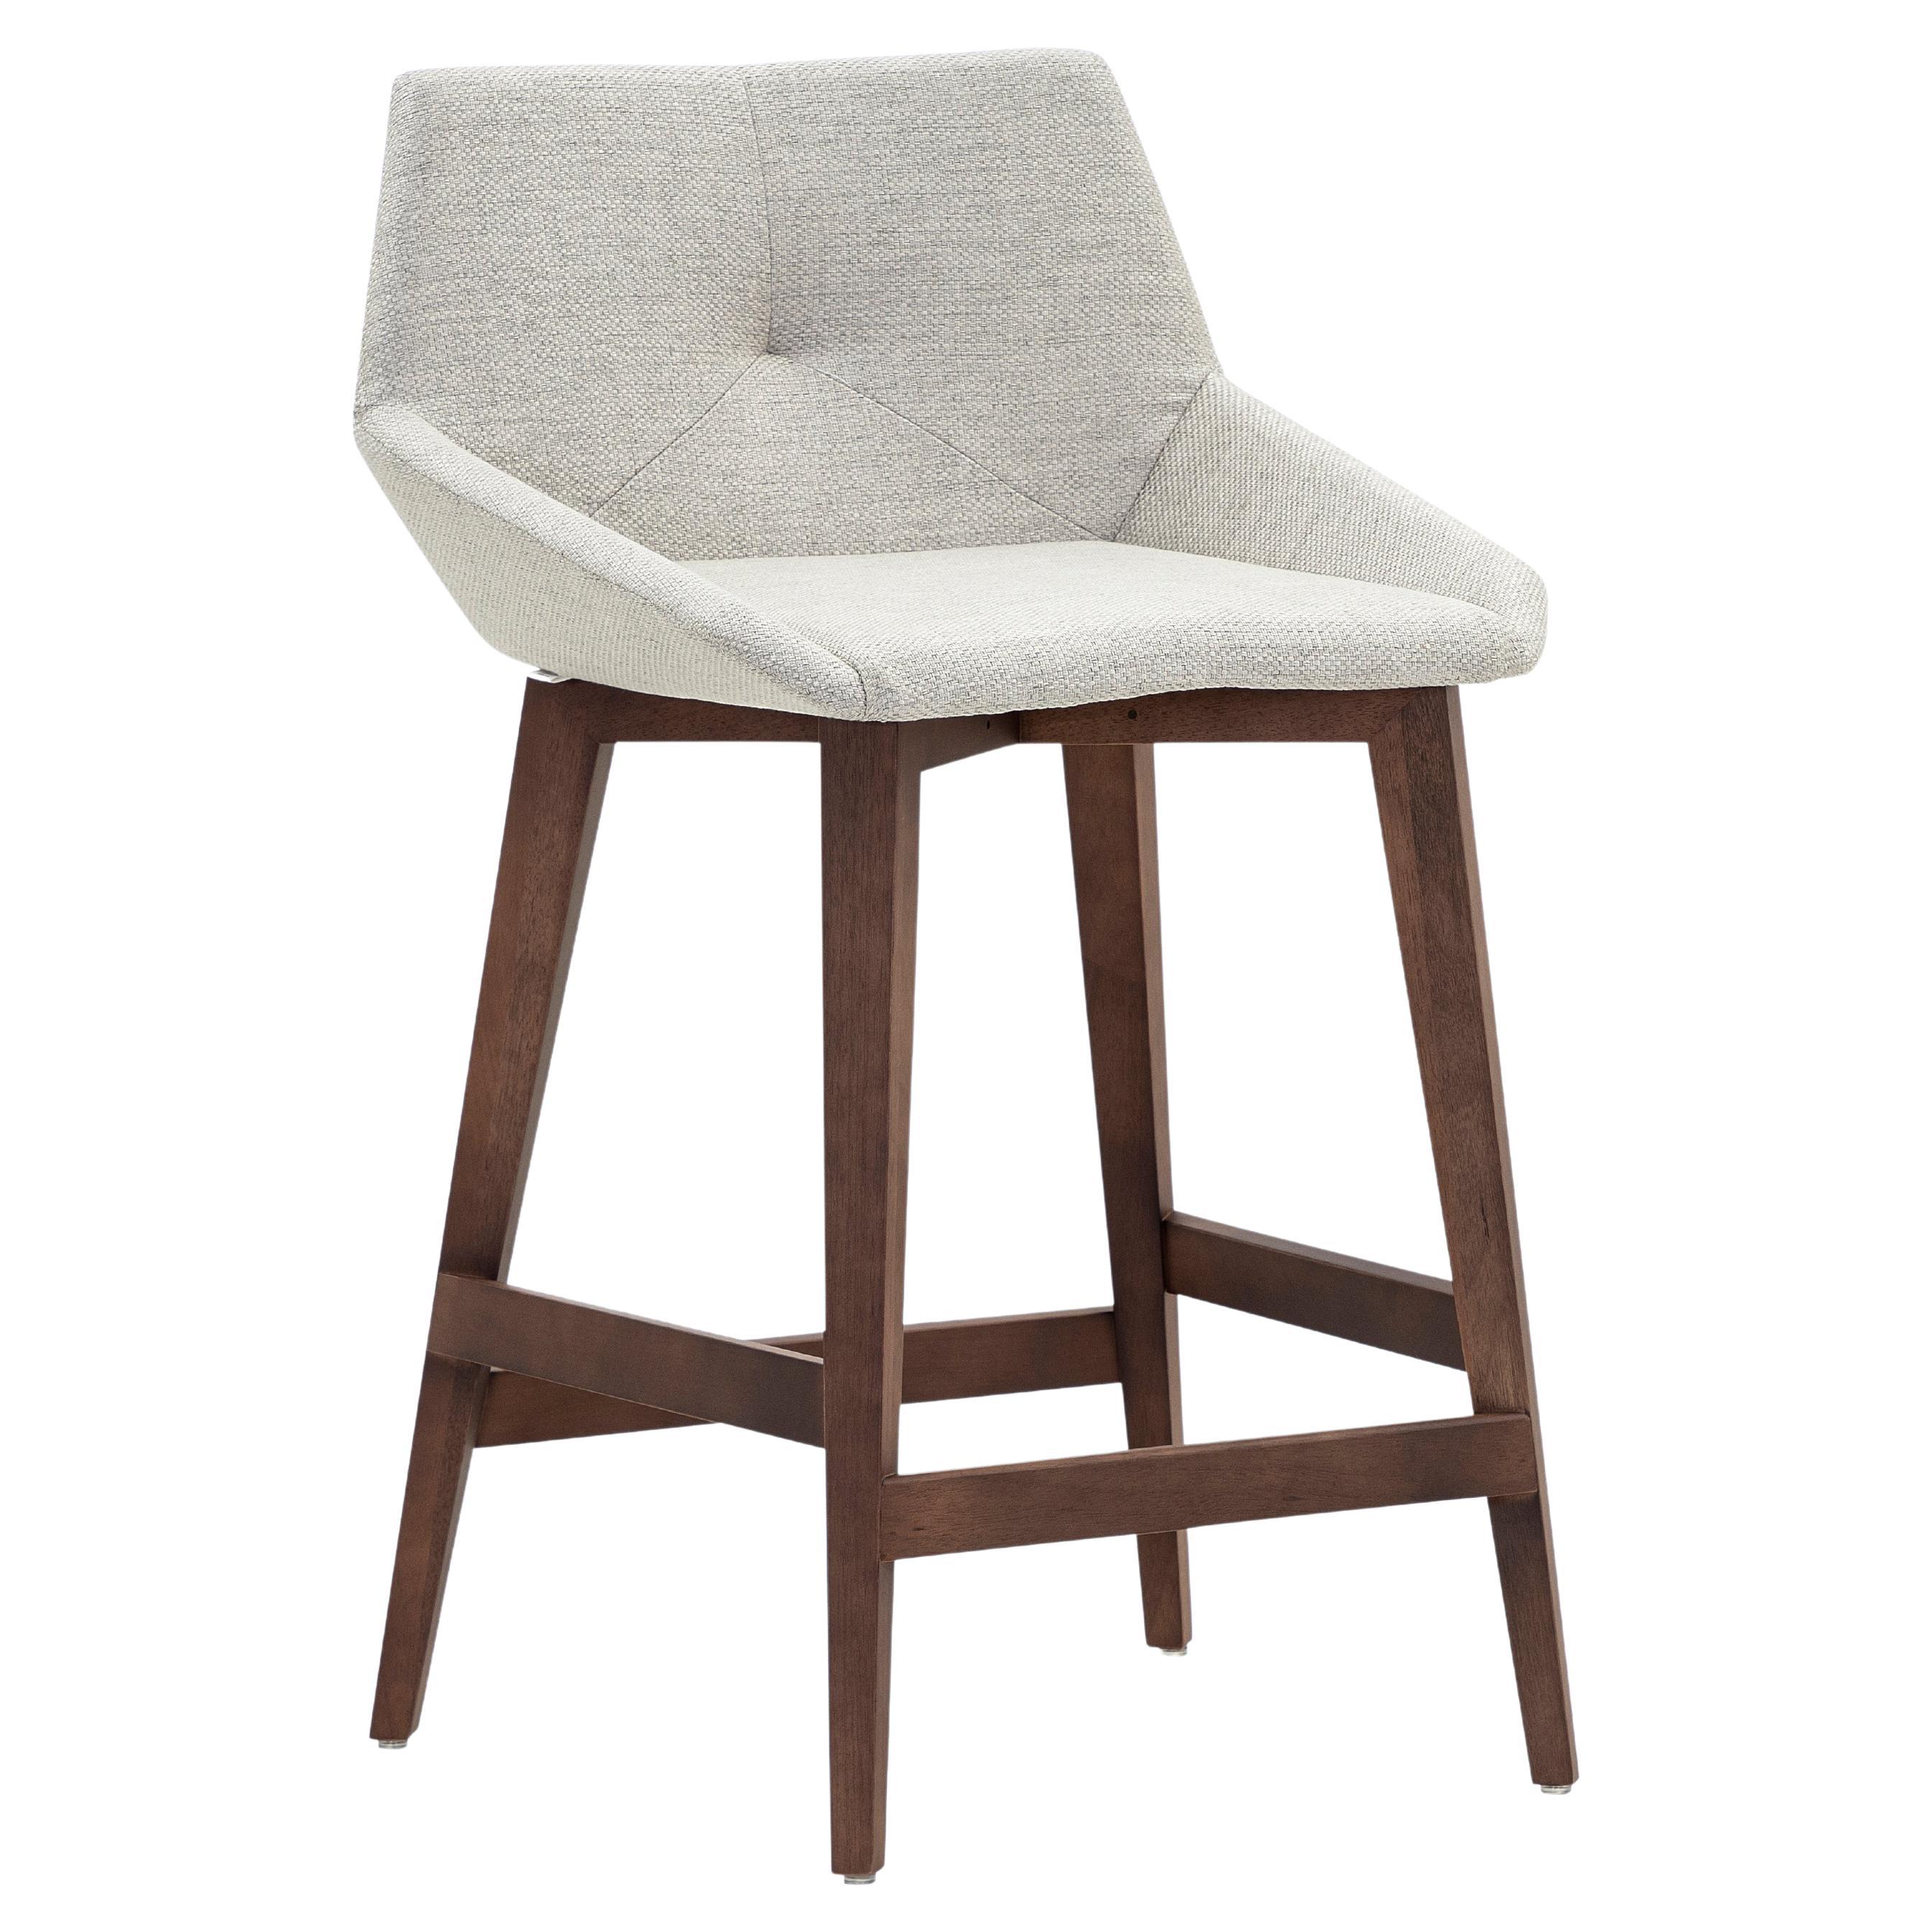 Geometric Cubi Counter Stool Walnut Wood Base and Off-White Fabric Seat For Sale